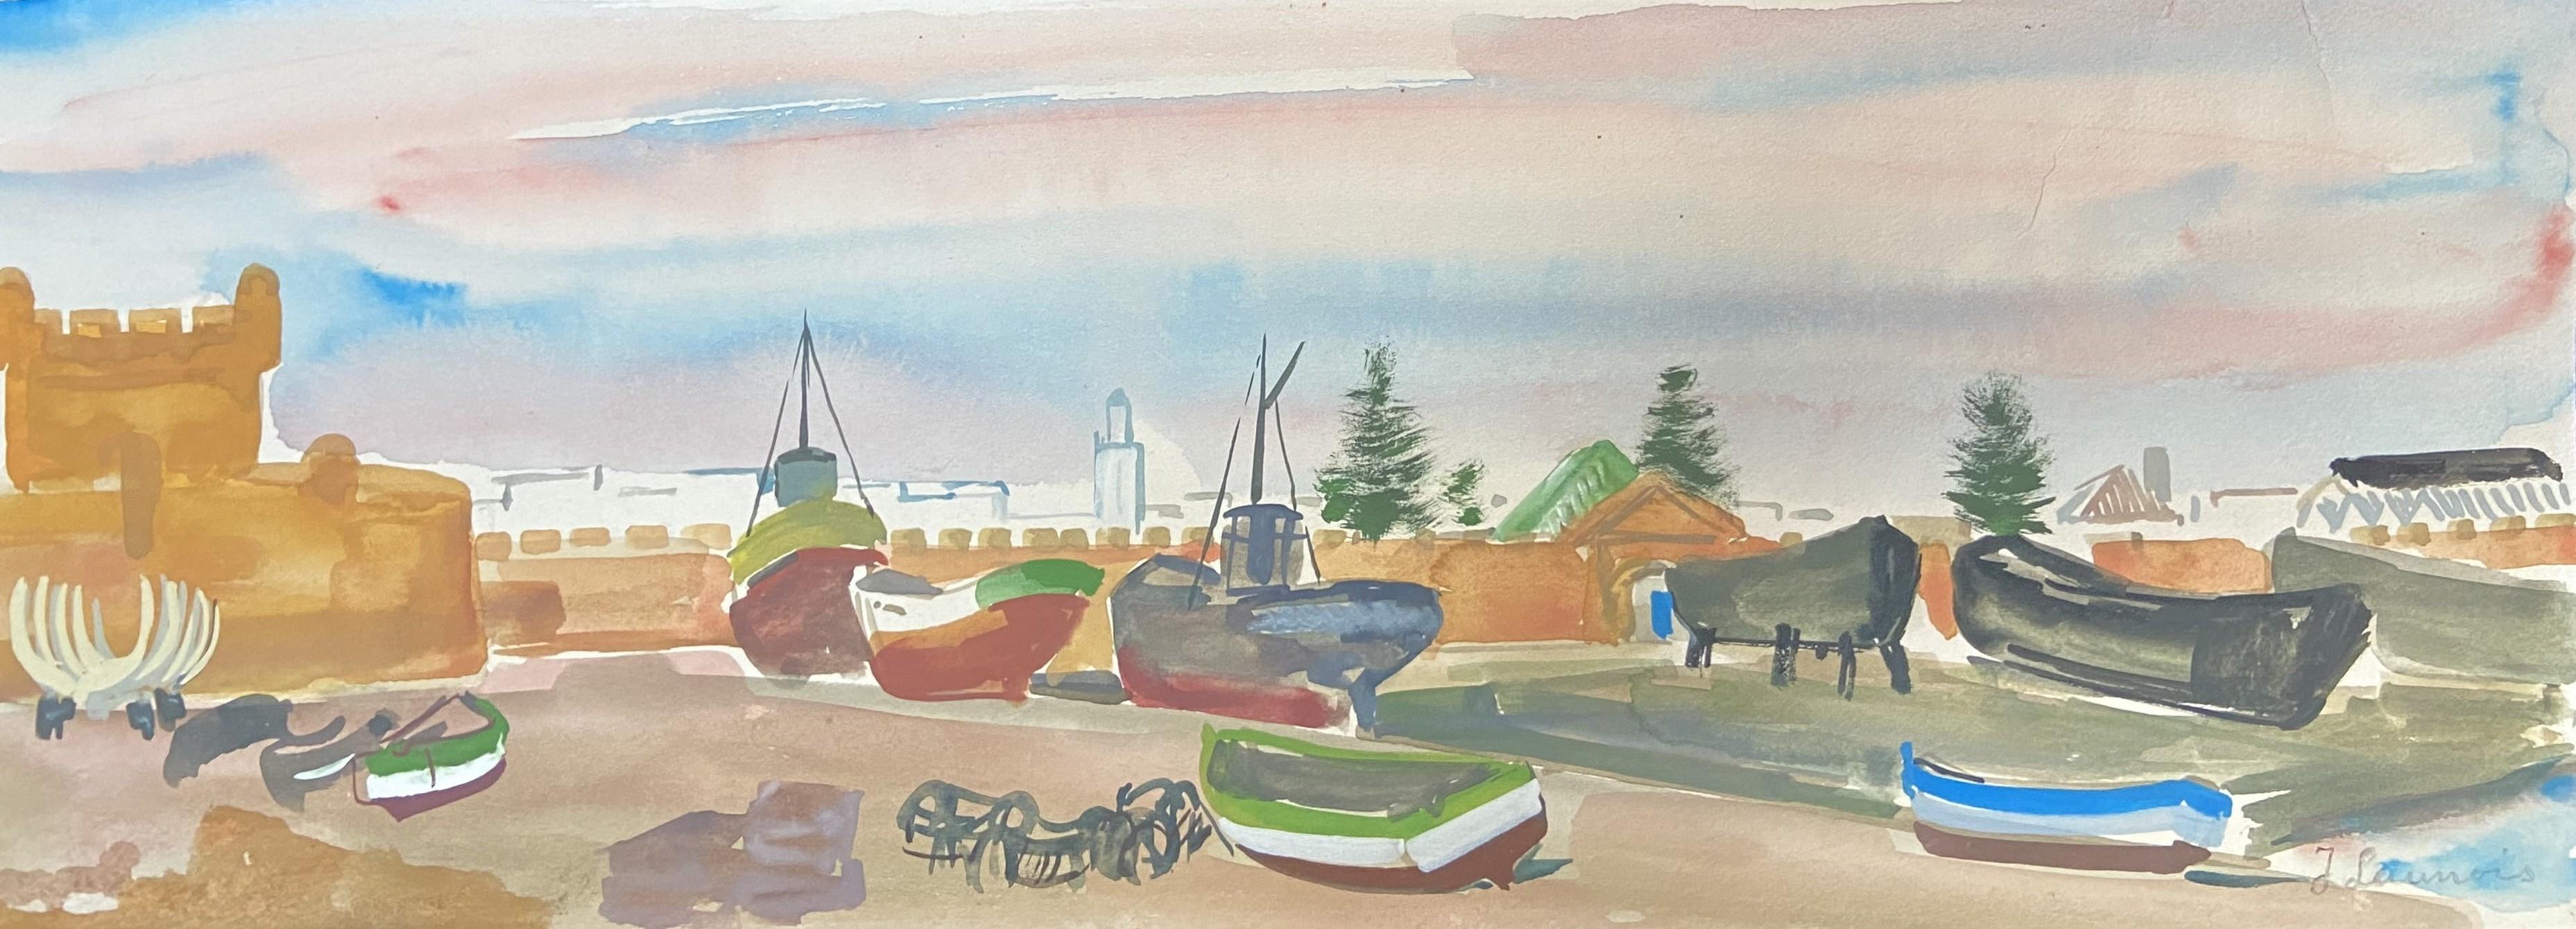 Jean Launois (1898-1942) 
A North African landscape, A Port (Essaouira ?)
signed lower right
Watercolor on paper
14 x 41.5 cm
Framed : 30 x 57 cm

It is most likely a view of the port of Essaouira (known as Mogador at the time), with the tower of